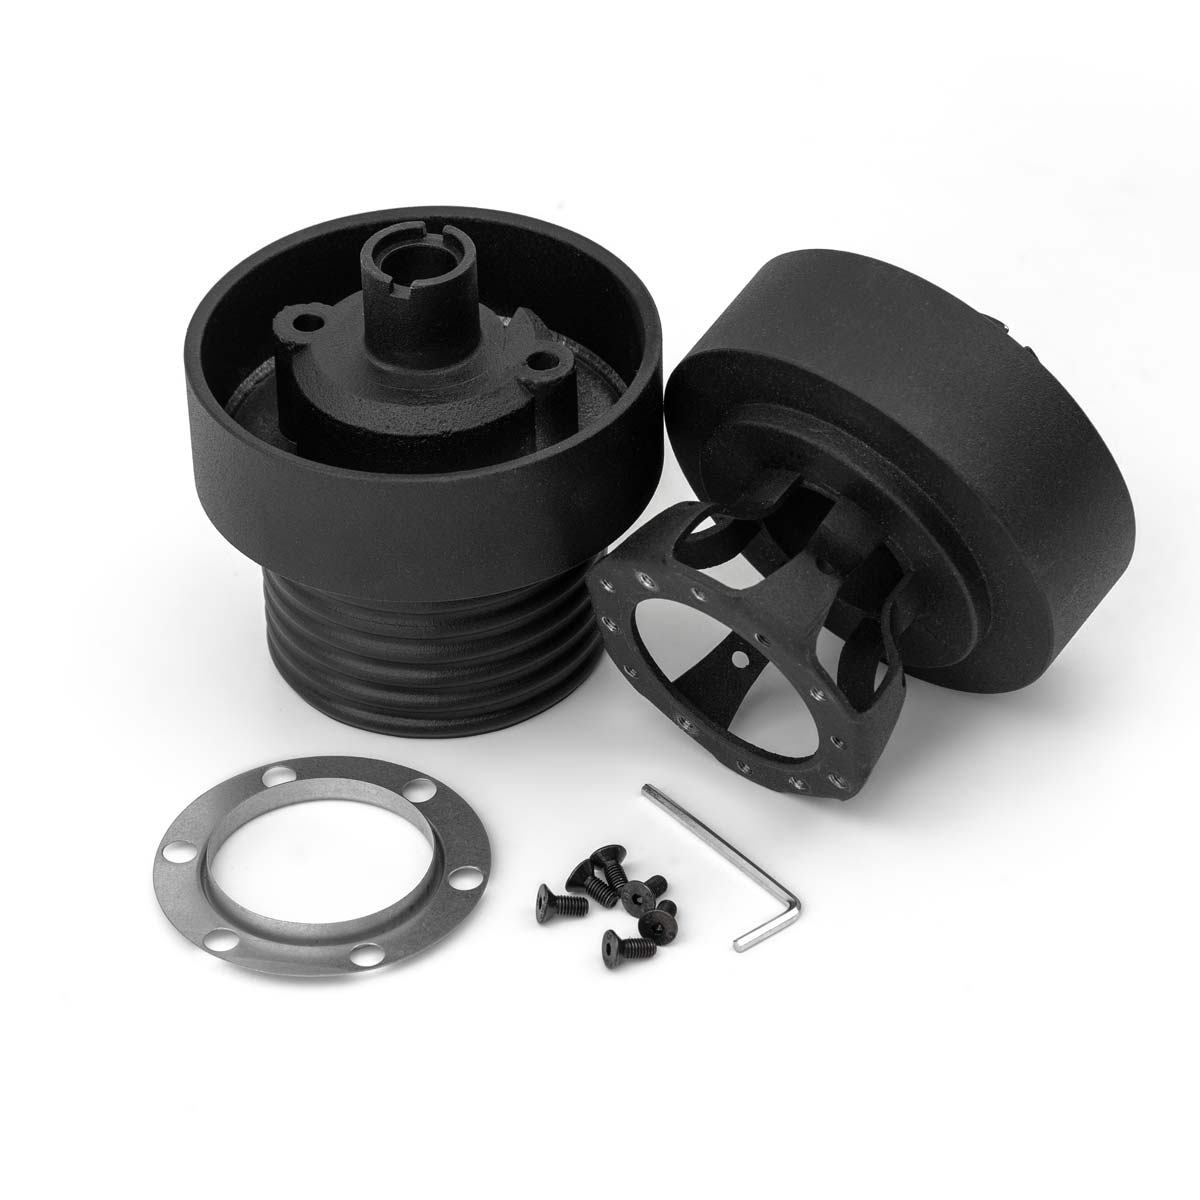 LUISI steering wheel hub Mercedes-Benz R129 from 1989 (TÜV-compliant deformable / 6x74mm 6x70mm)